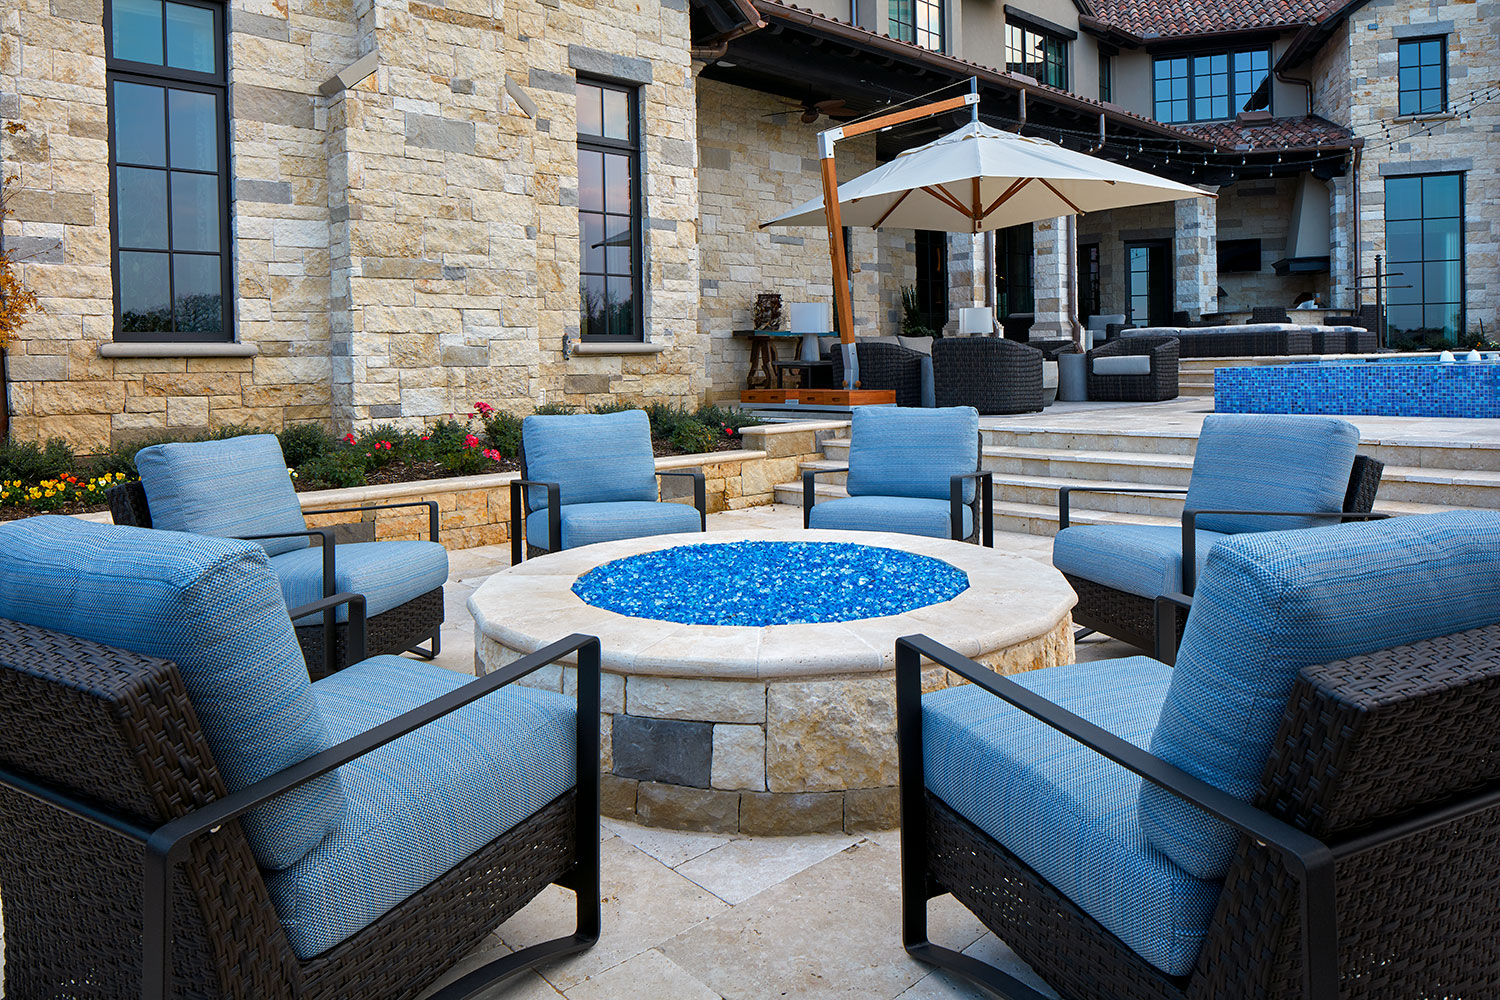 Backyard Stone Fire Pit With Woven, Upholstered Arm Chairs